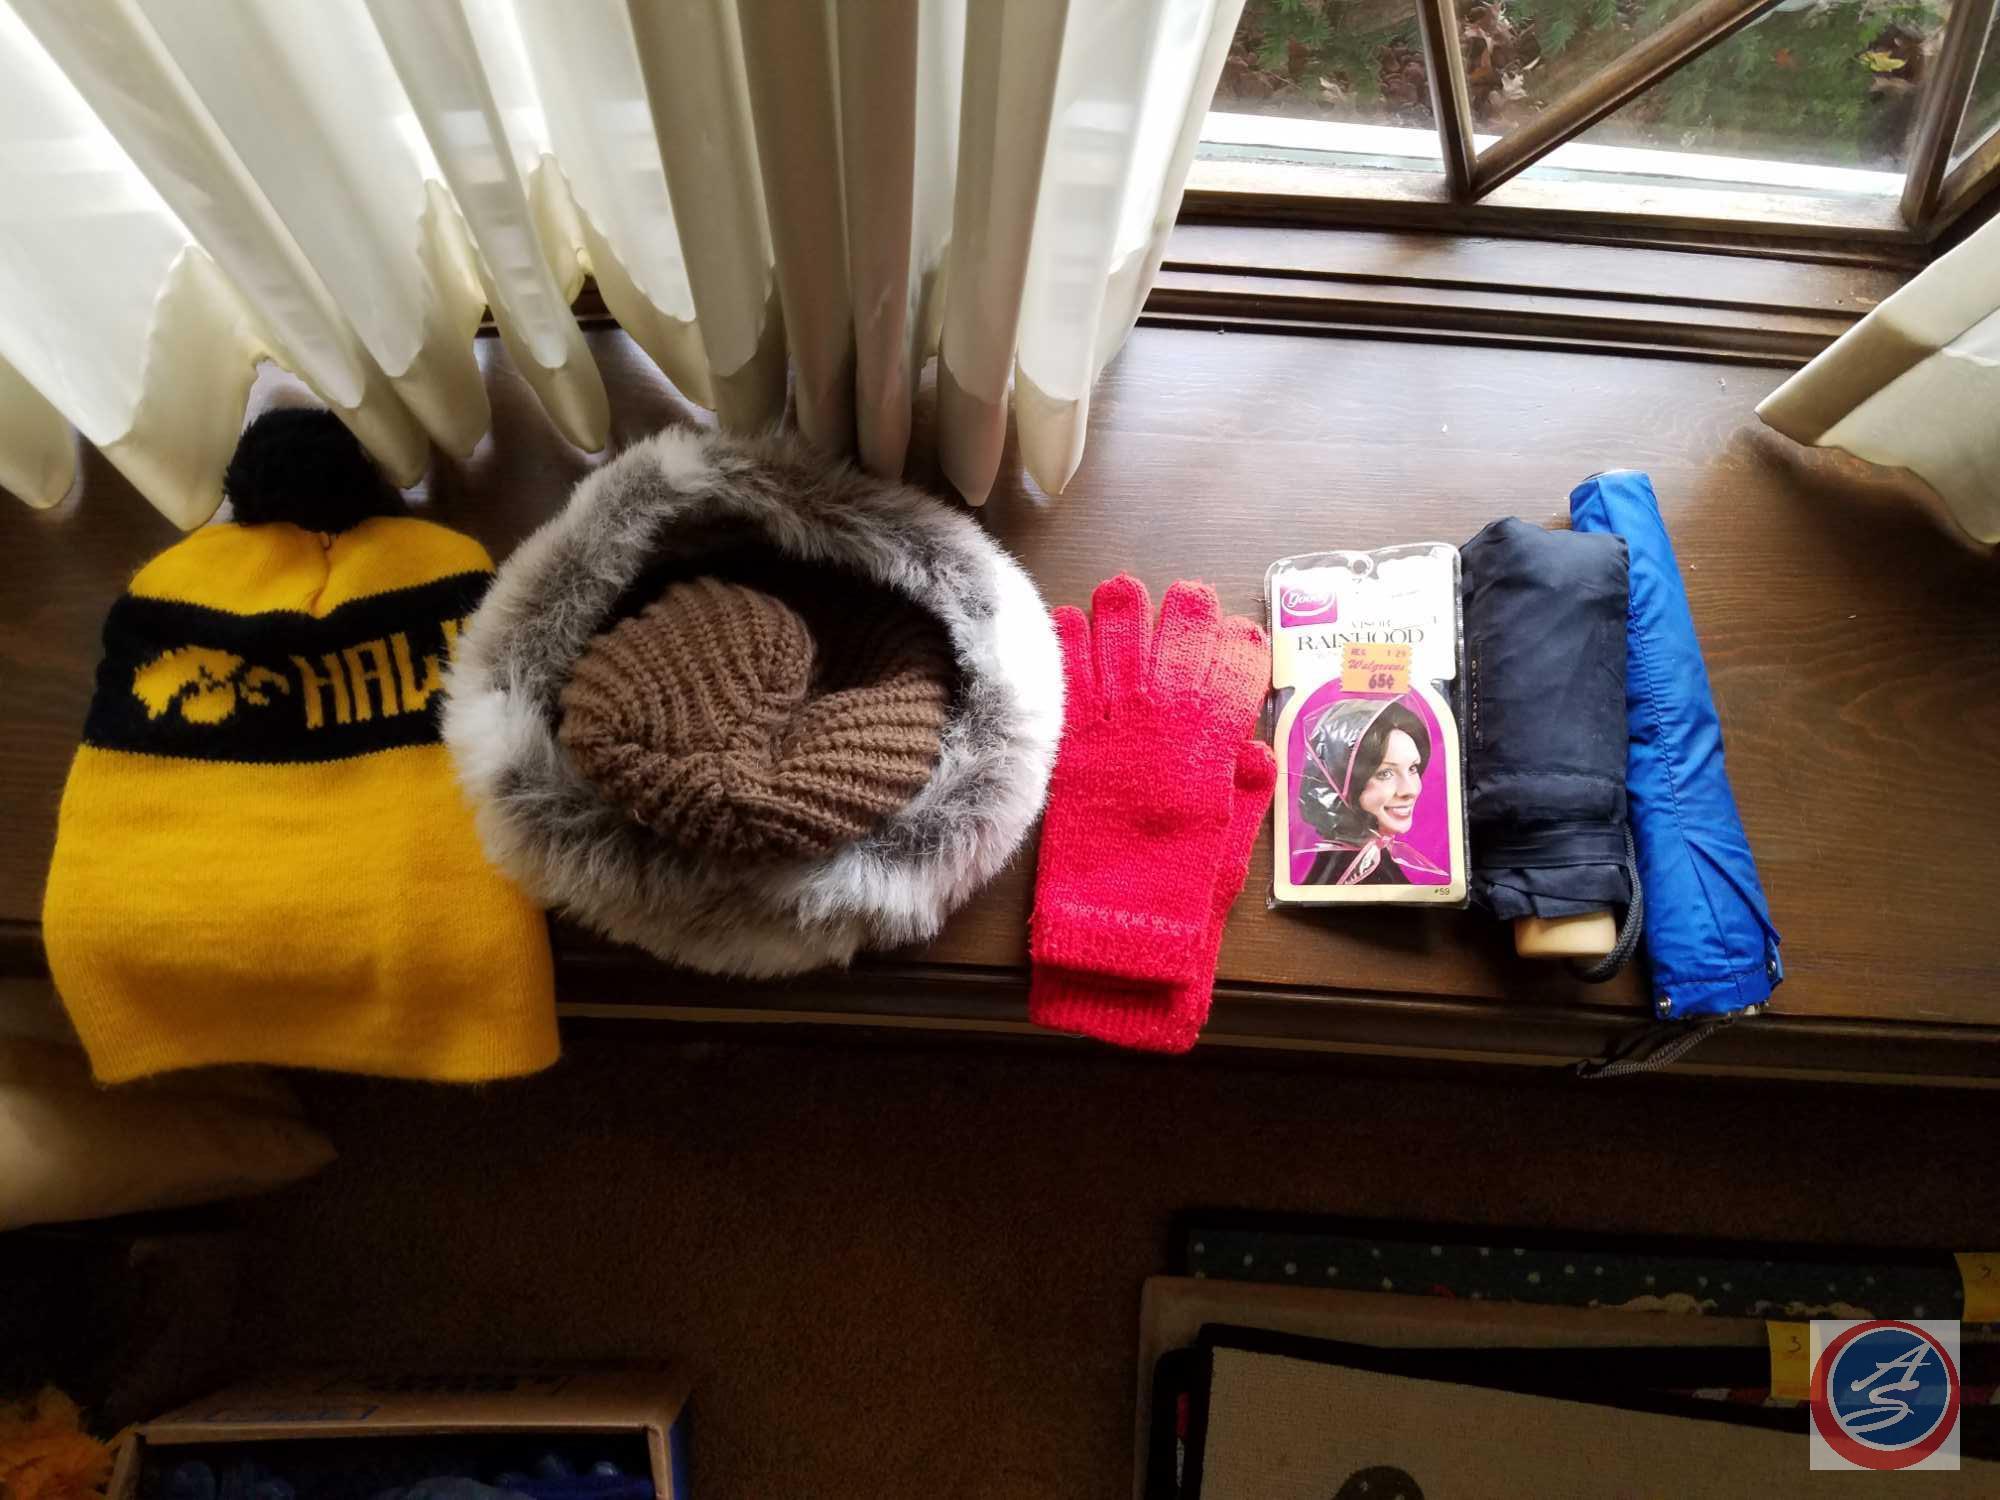 Winter Hats, Gloves, Mittens, Umbrellas, Shoe Sleeves, Candle, Tapestry Pillow, Decroative Plate